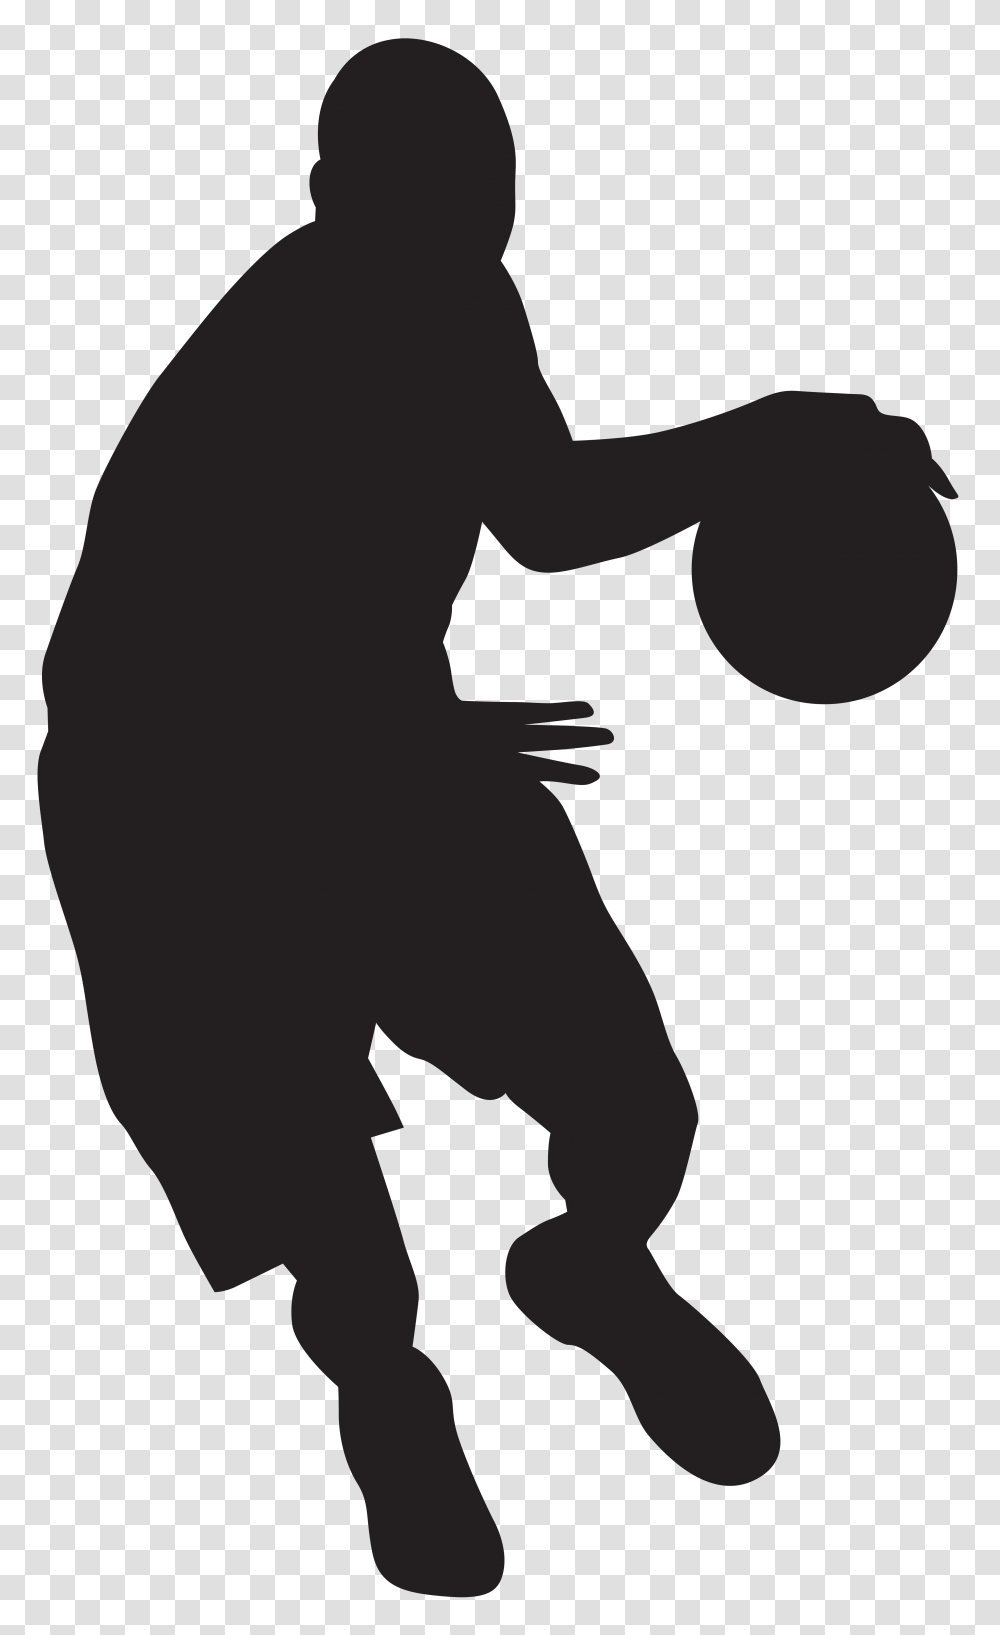 Basketball Player Silhouette Clip Art Gallery, Apparel, Sleeve, T-Shirt Transparent Png